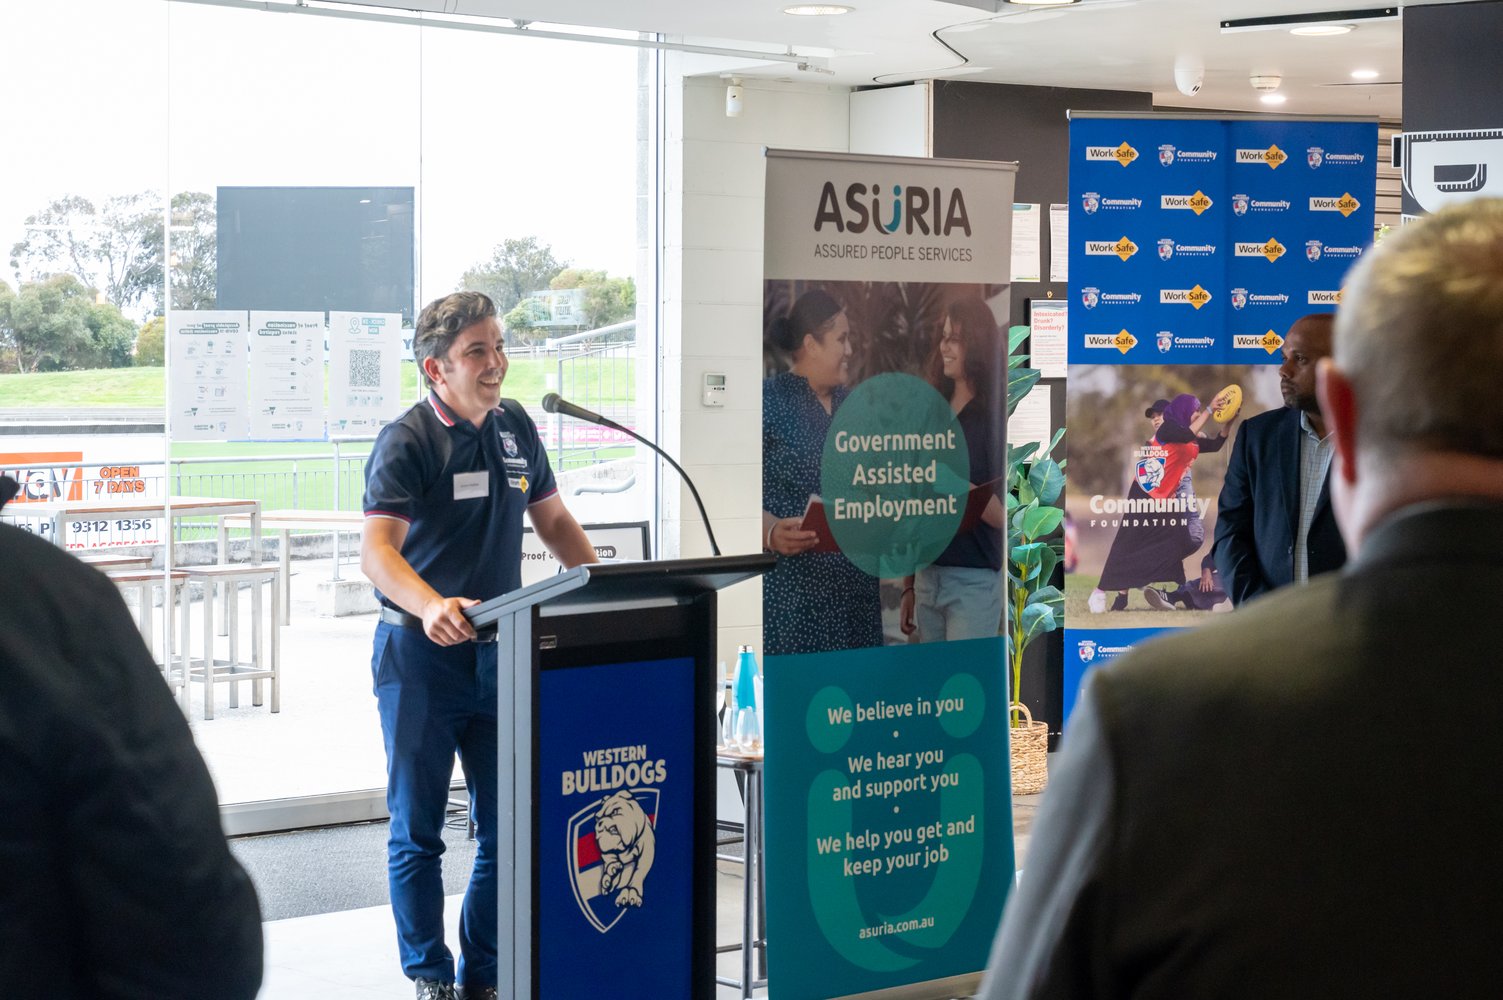 Western Bulldogs Community Foundation, Diversity and Youth Manager, Simon Rodder speaking at the Asuria JVES launch in front of guests as VU Whitten Oval